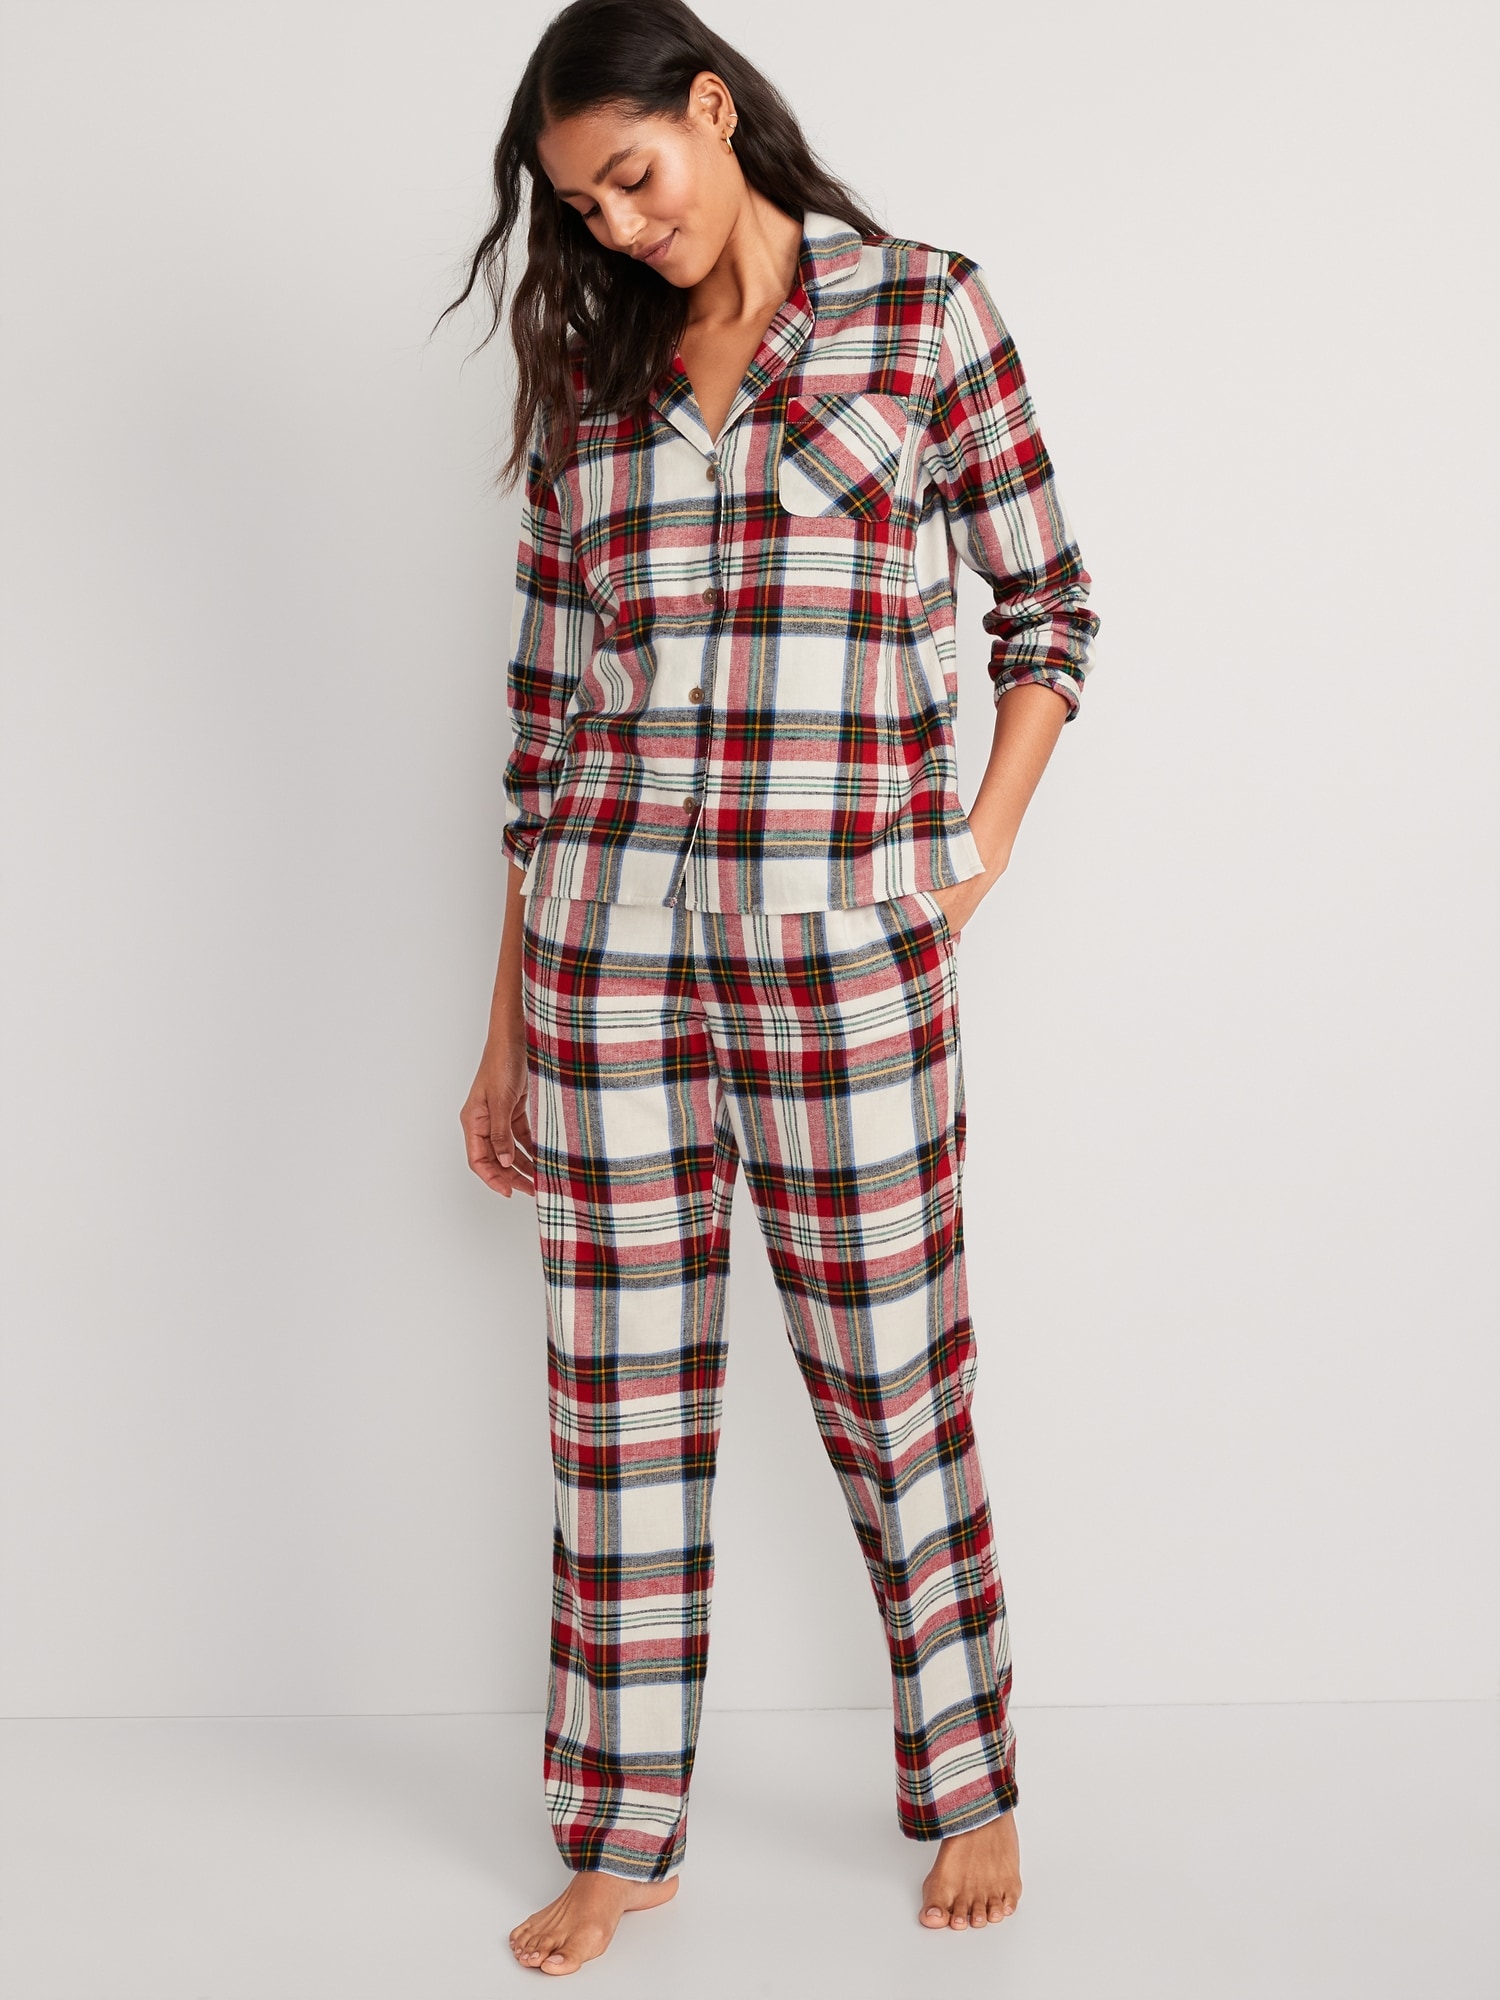 Printed Flannel Pajama Set for Women, Old Navy